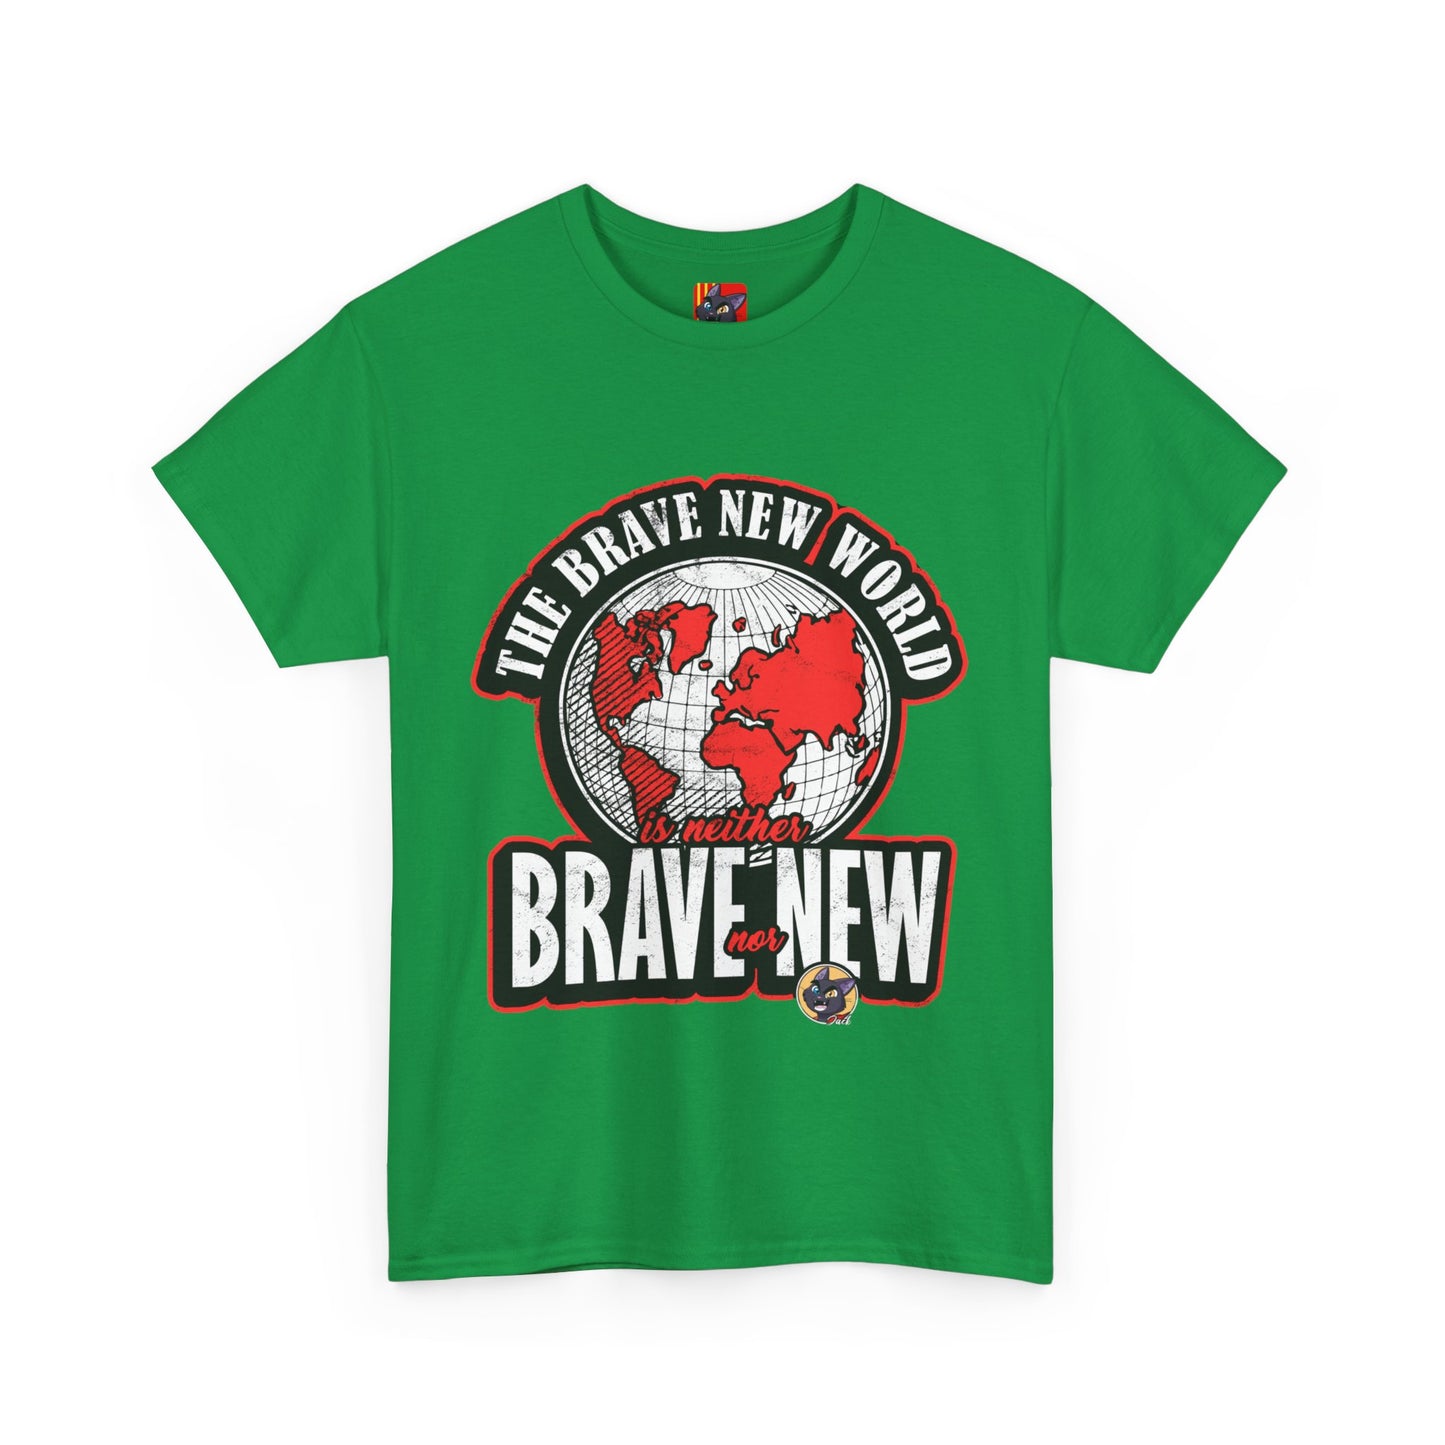 The Free Spirit T-Shirt: The brave new world is neither brave nor new Jack